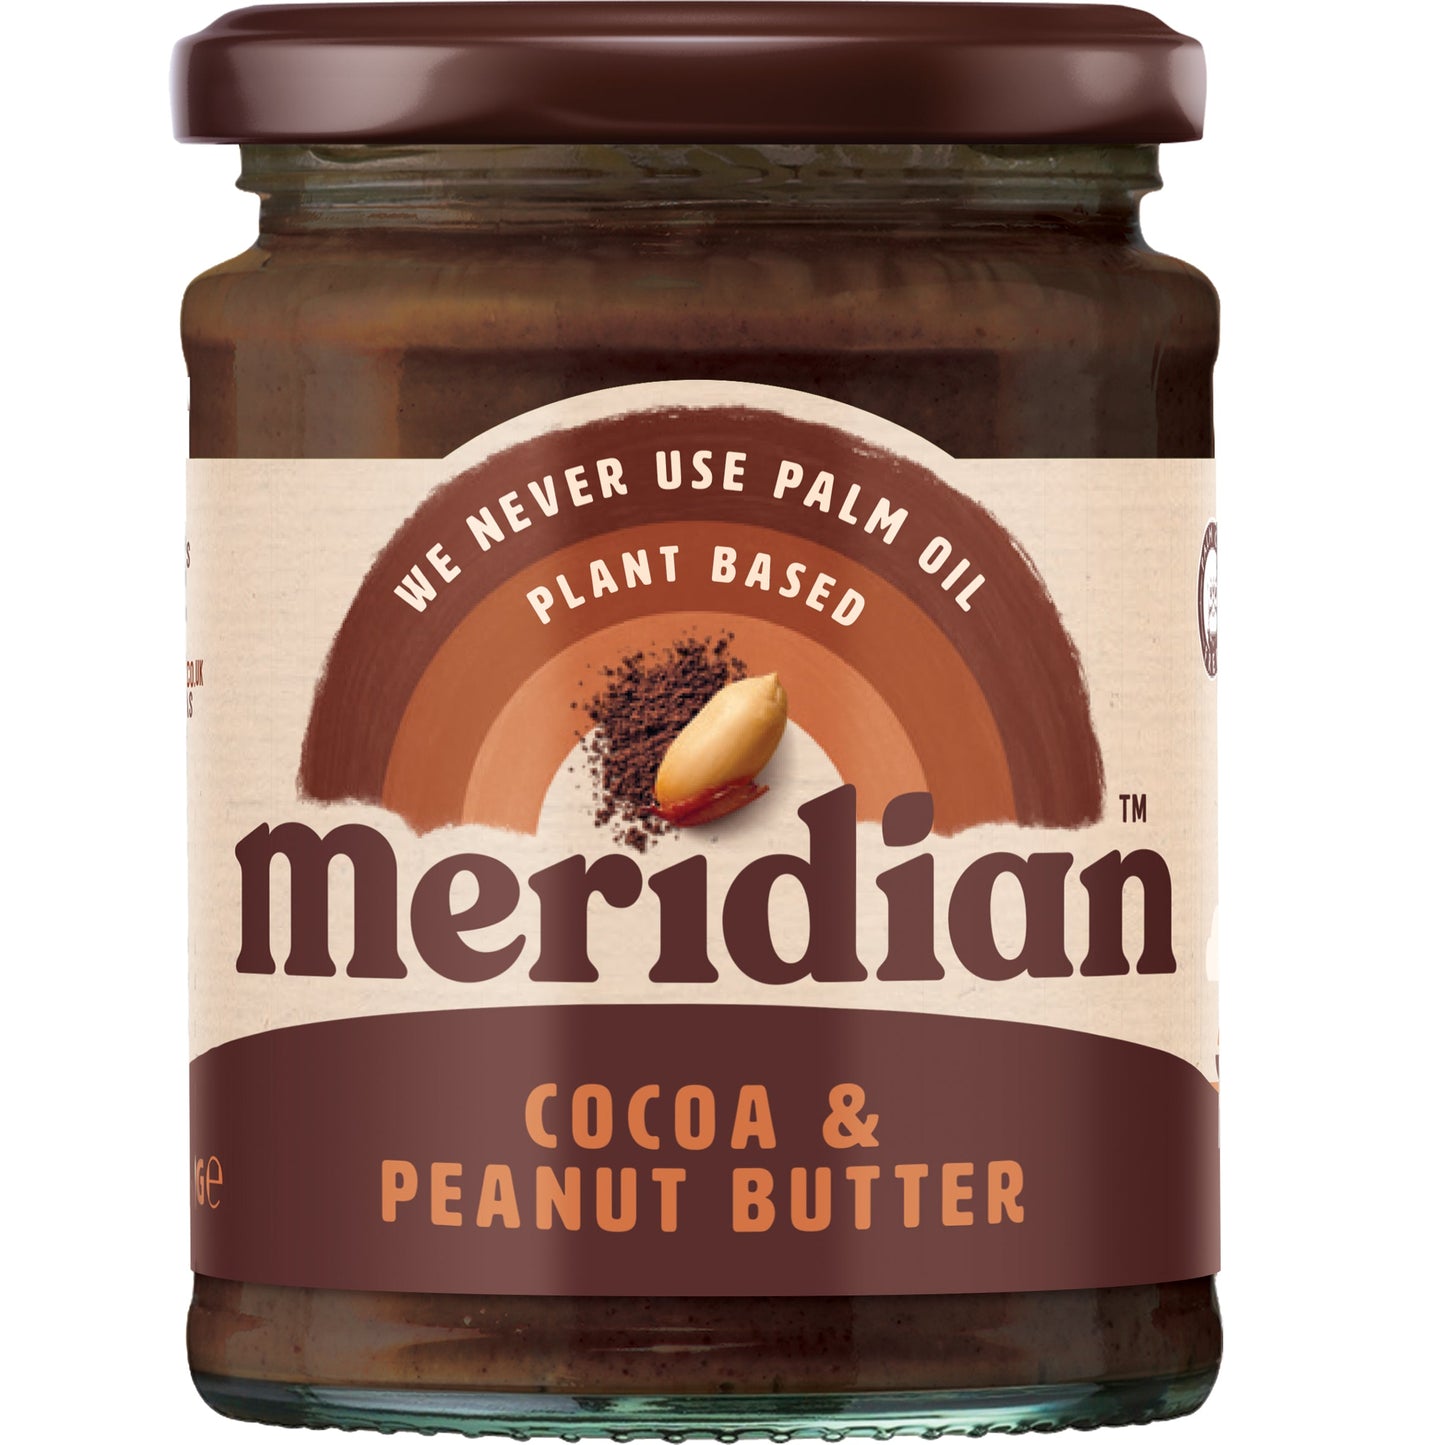 Cocoa and Peanut Butter 39844B